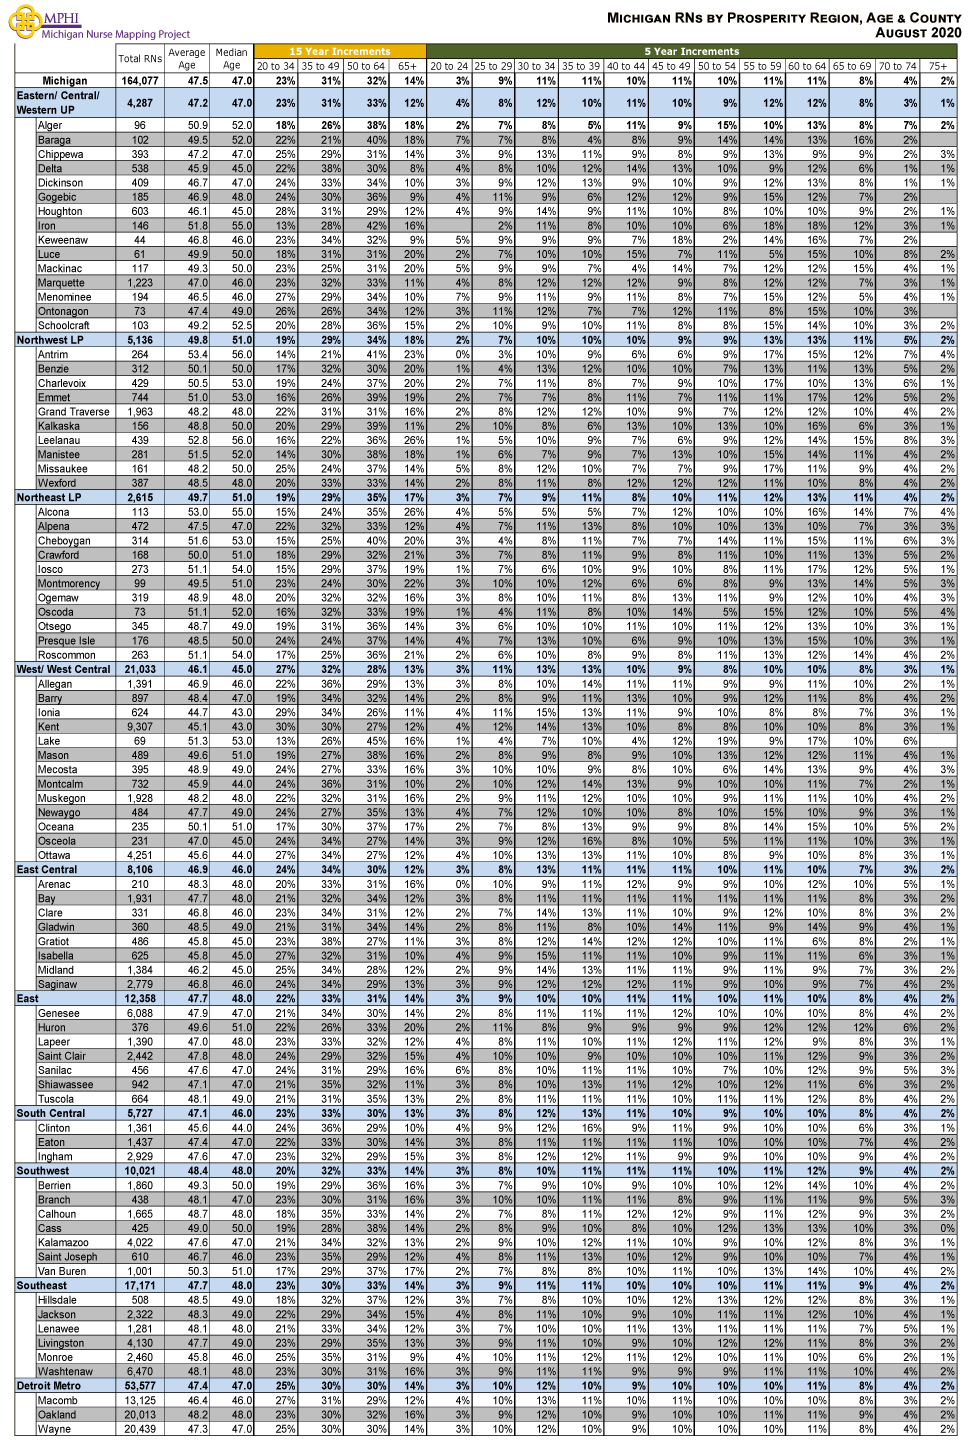 table depicting Michigan's Licensed Registered Nurses by age groups, county and prosperity regions in 2020